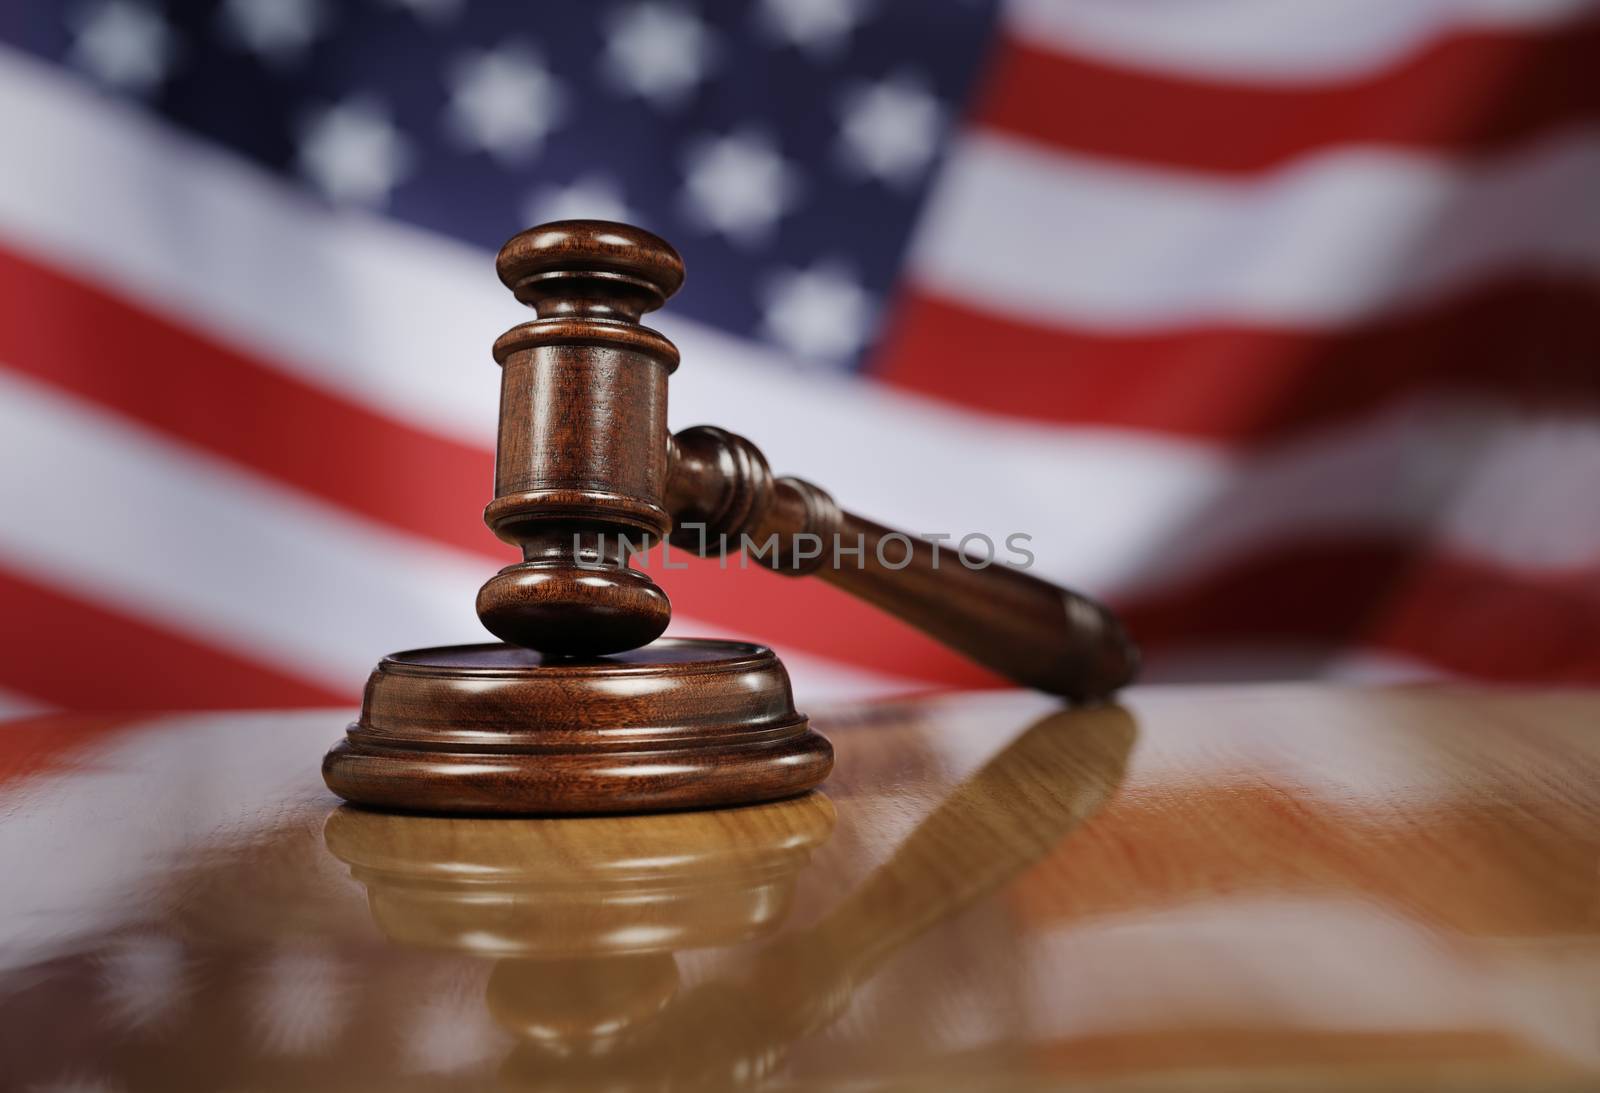 Mahogany wooden gavel on glossy wooden table, USA flag in the background.